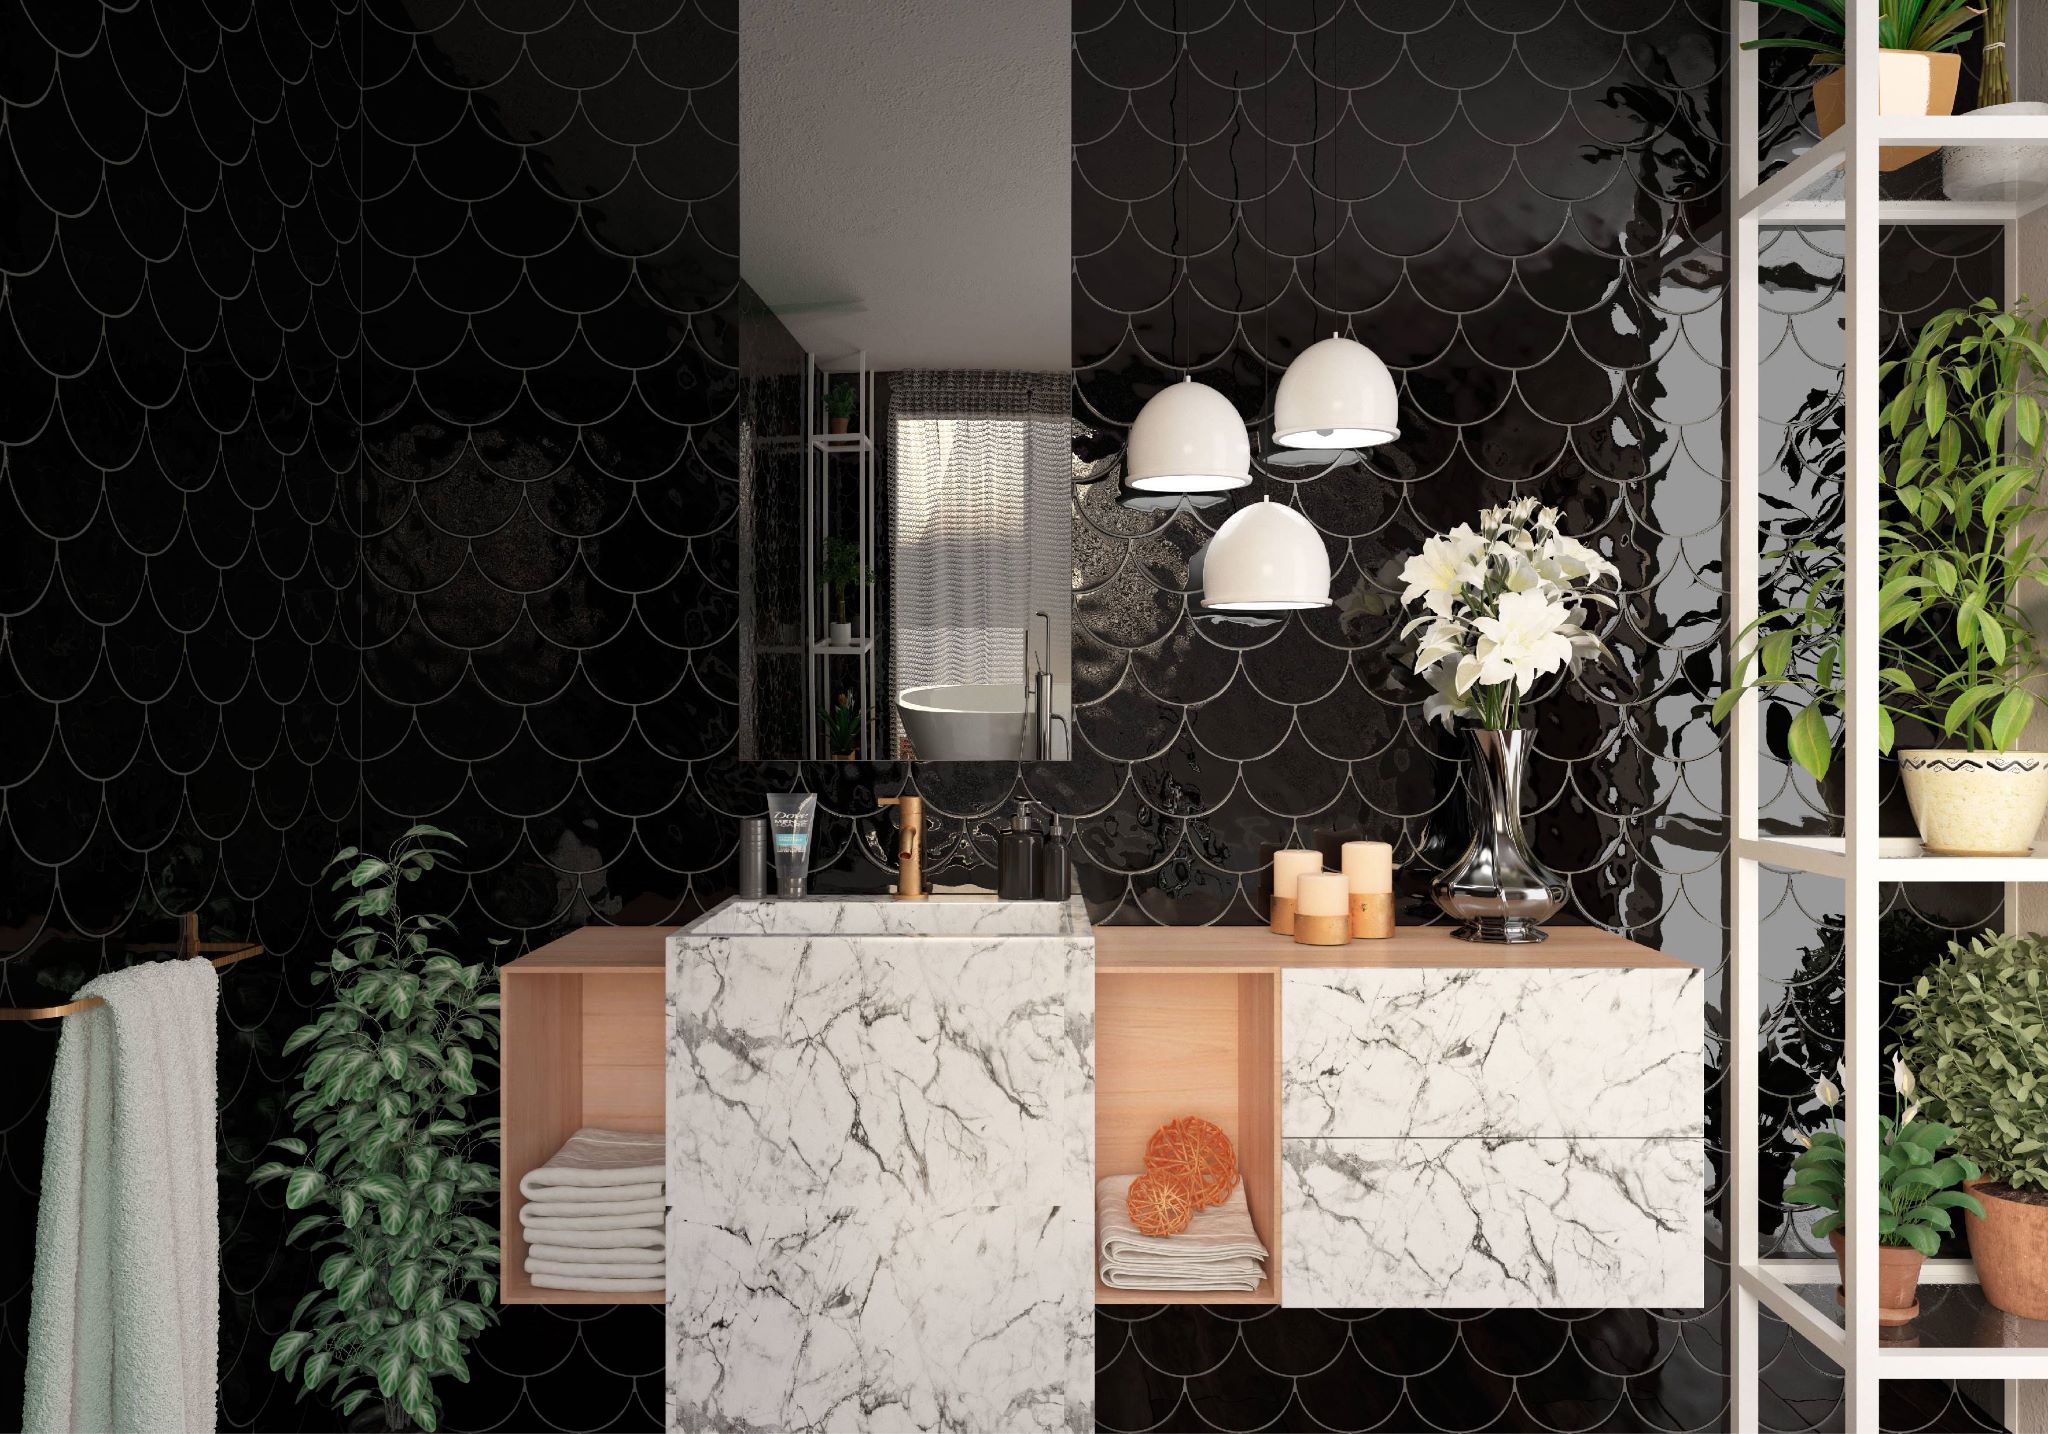 Monochrome_1_G | Stones & More | Finest selection of Mosaics, Glass, Tile and Stone